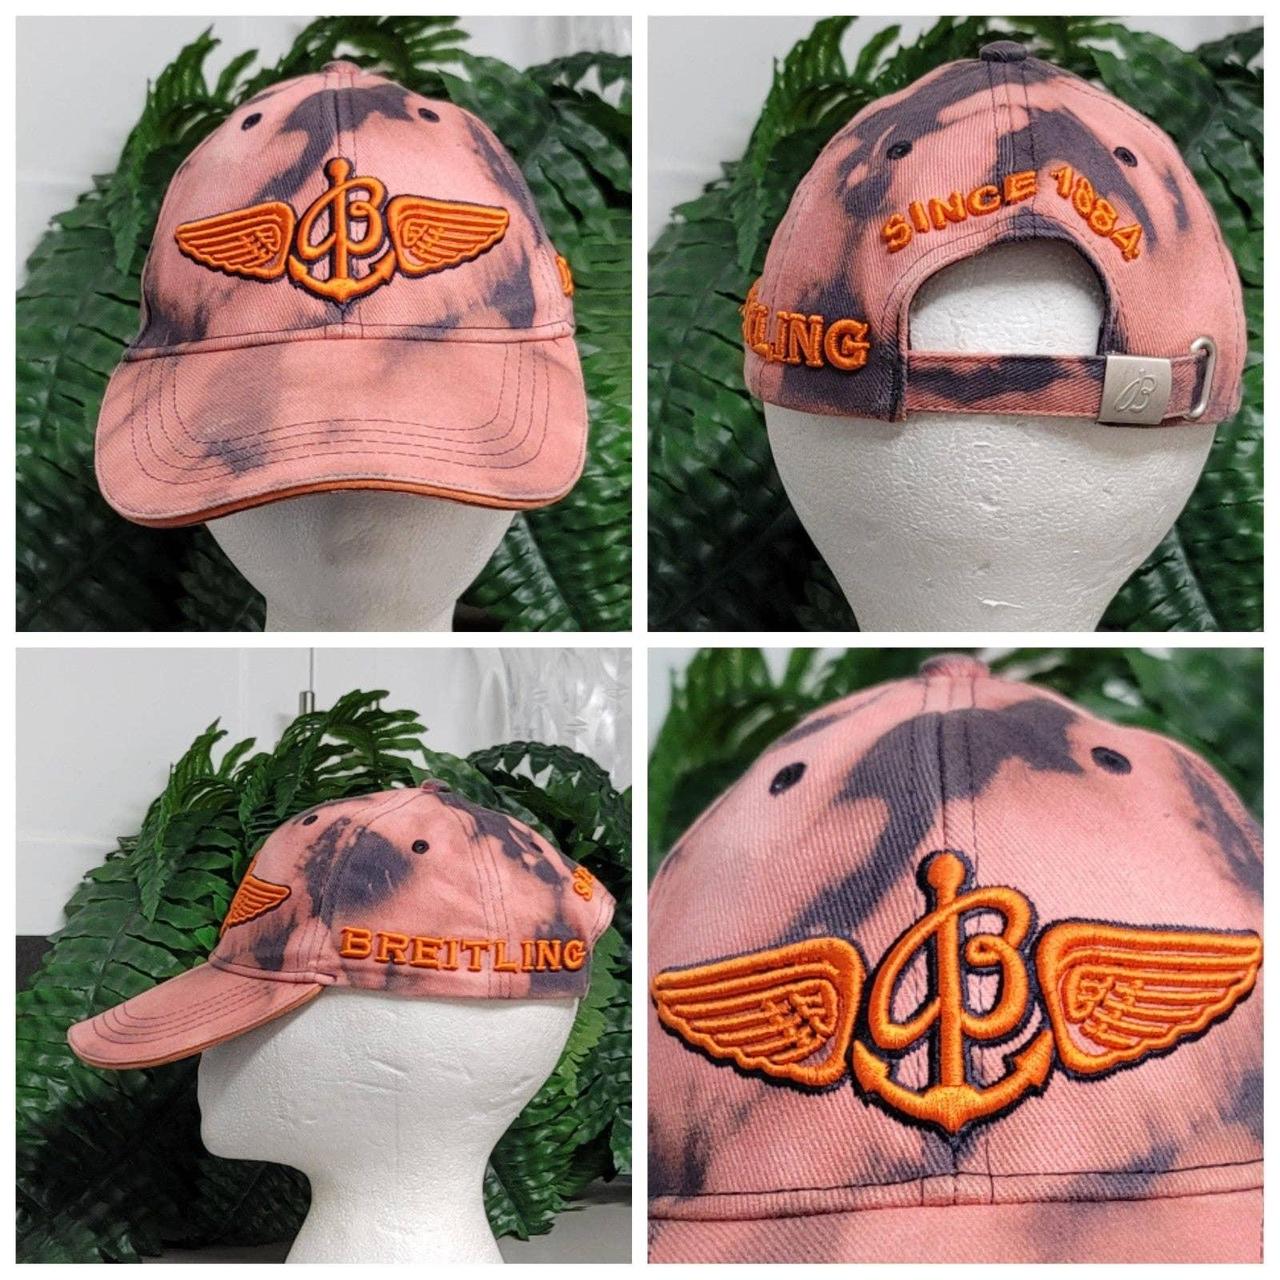 Product Image 1 - Breitling Watch Custom Bleach-dyed Hat.